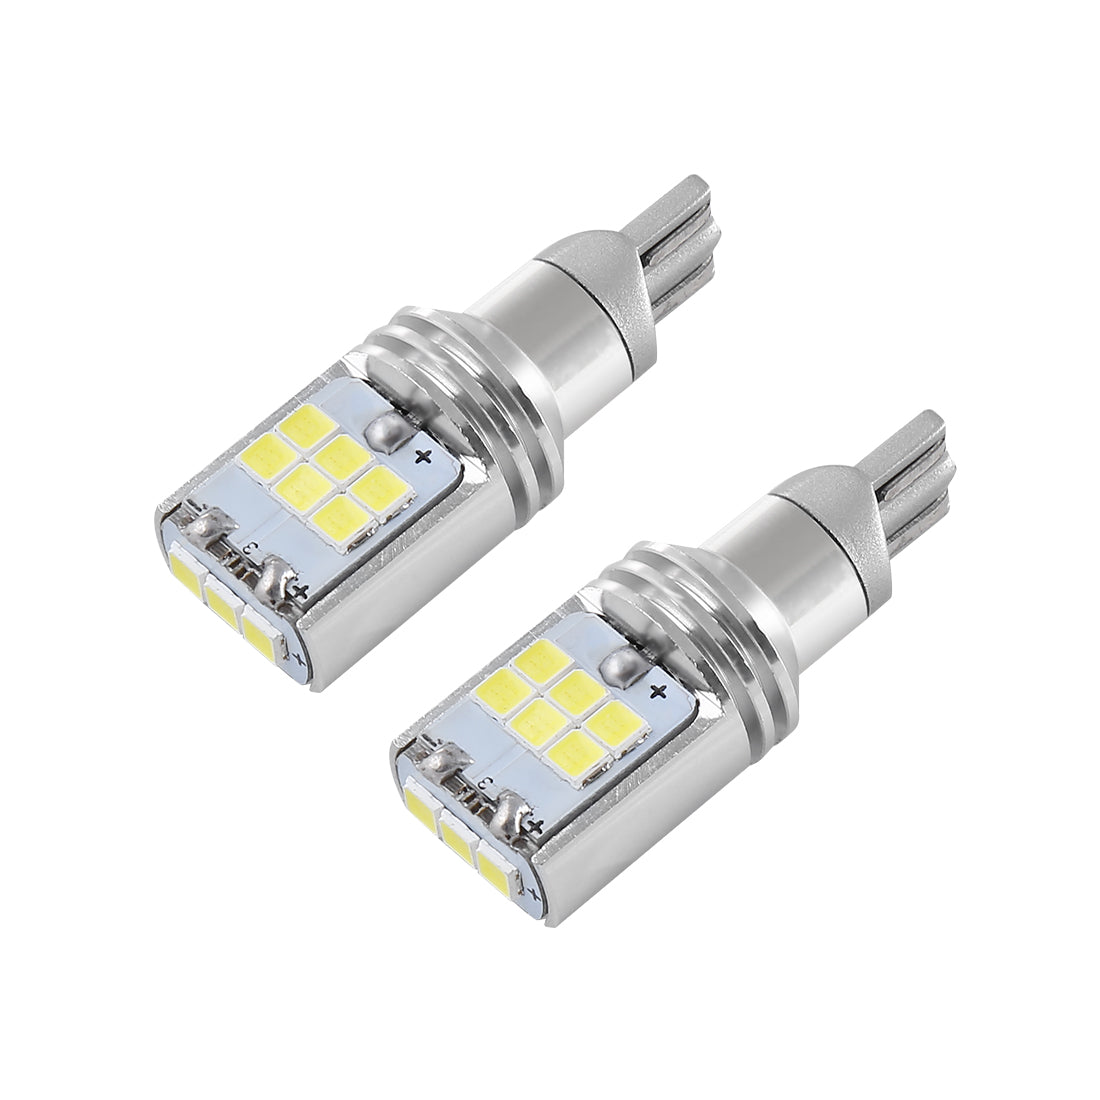 Super Bright 3030 15SMD LED W16W 921 912 T15 Car Backup Reserve Lights Bulb  Canbus No Error Tail Lamp - China Amber LED Bulb, Car Backup Reserve Lights